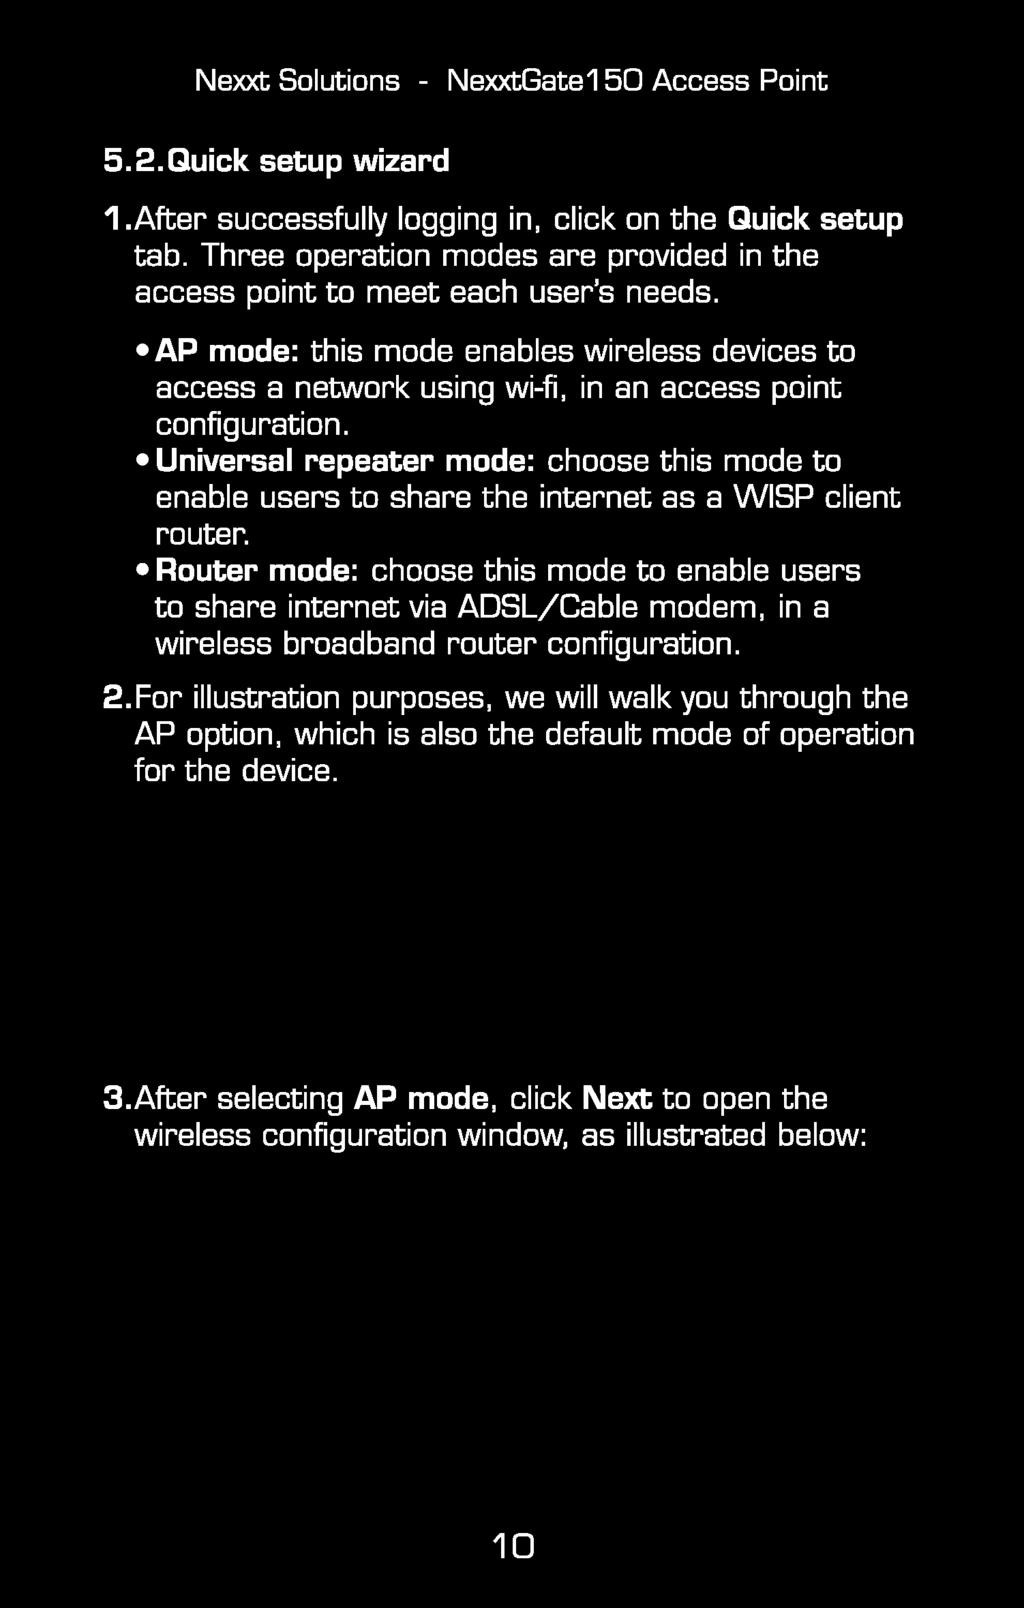 AP mode: this mode enables wireless devices to access a network using wi-fi, in an access